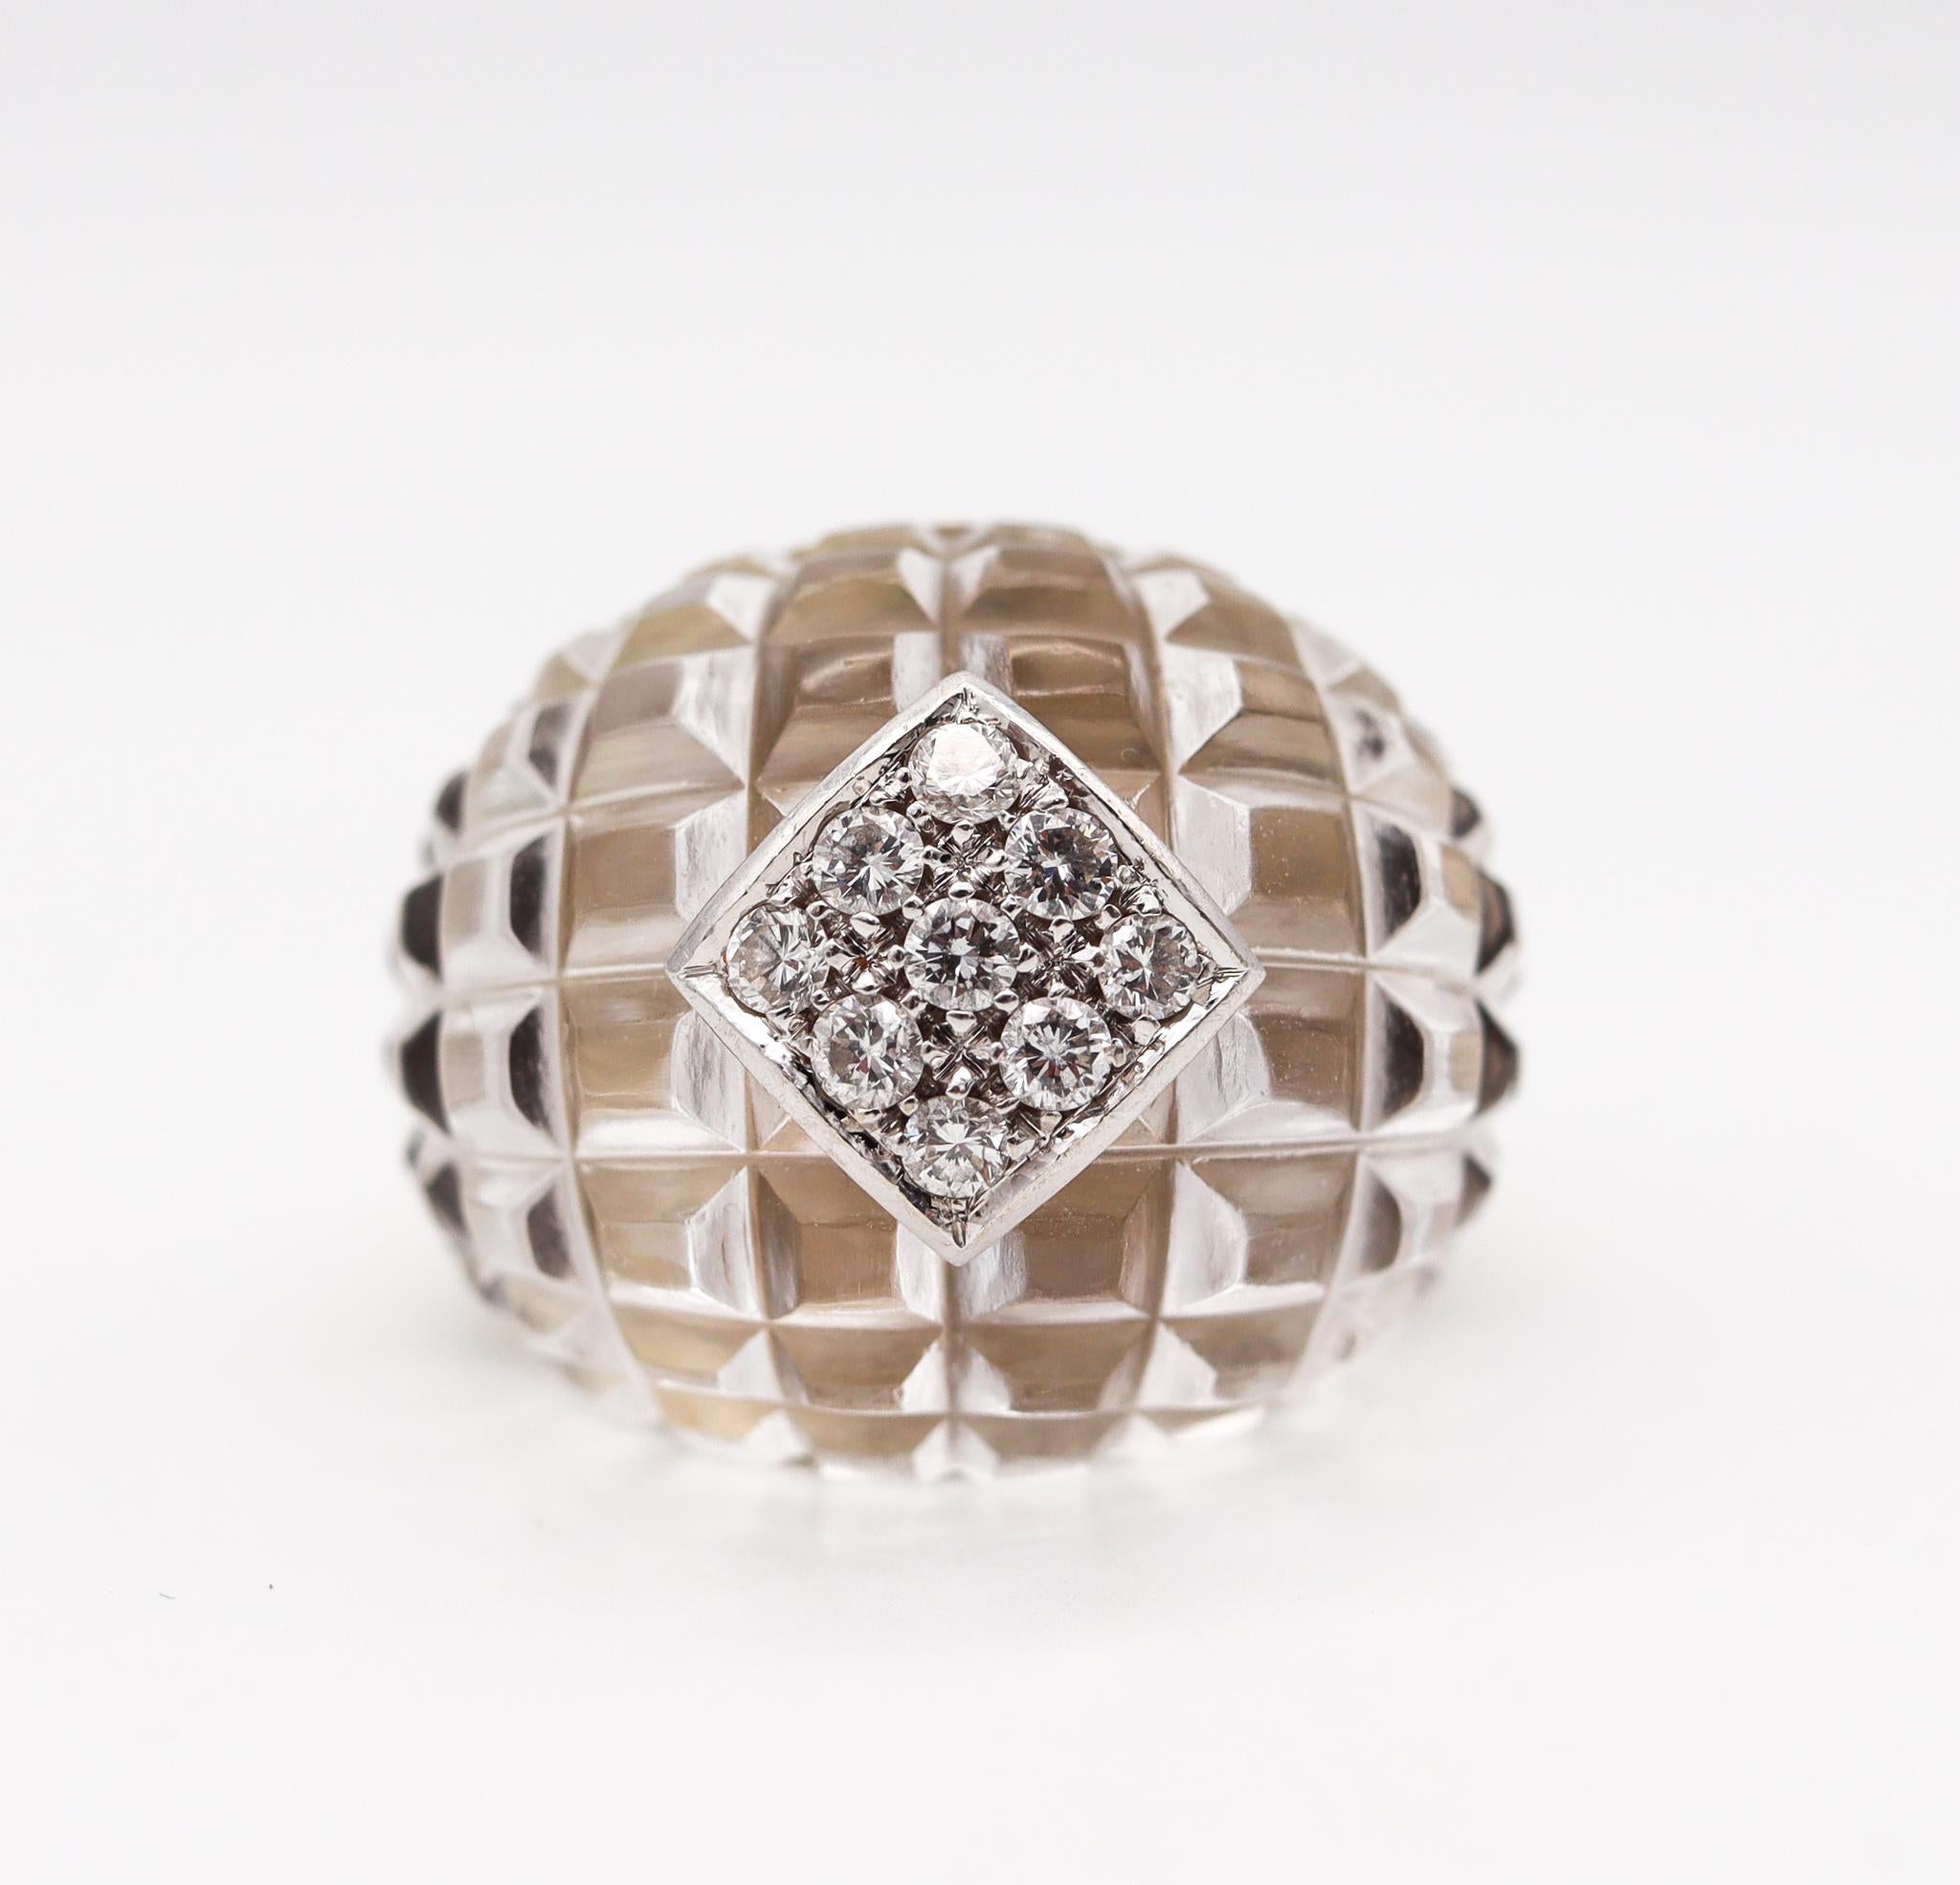 Van Cleefs & Arpels 1970 Cocktail Bombe Ring in 18Kt with Diamond & Rock Quartz In Excellent Condition For Sale In Miami, FL